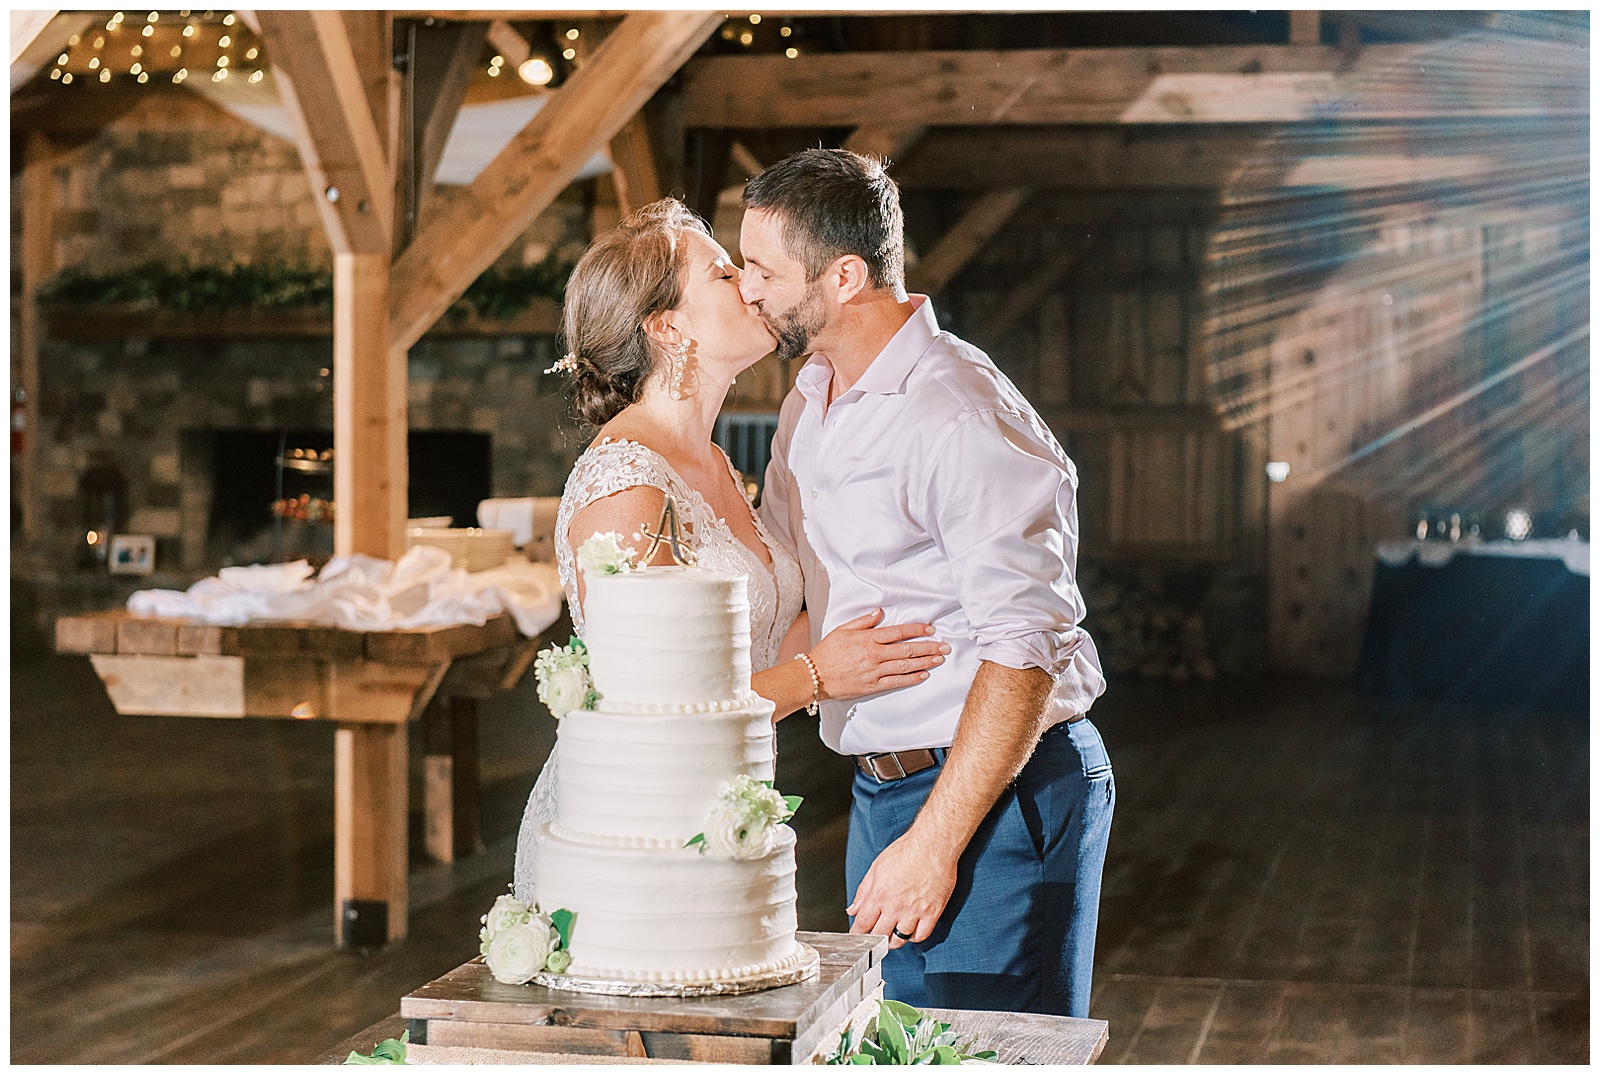 bride and groom kiss in front of three tiered white cake at indoor summer wedding reception in wooden barn